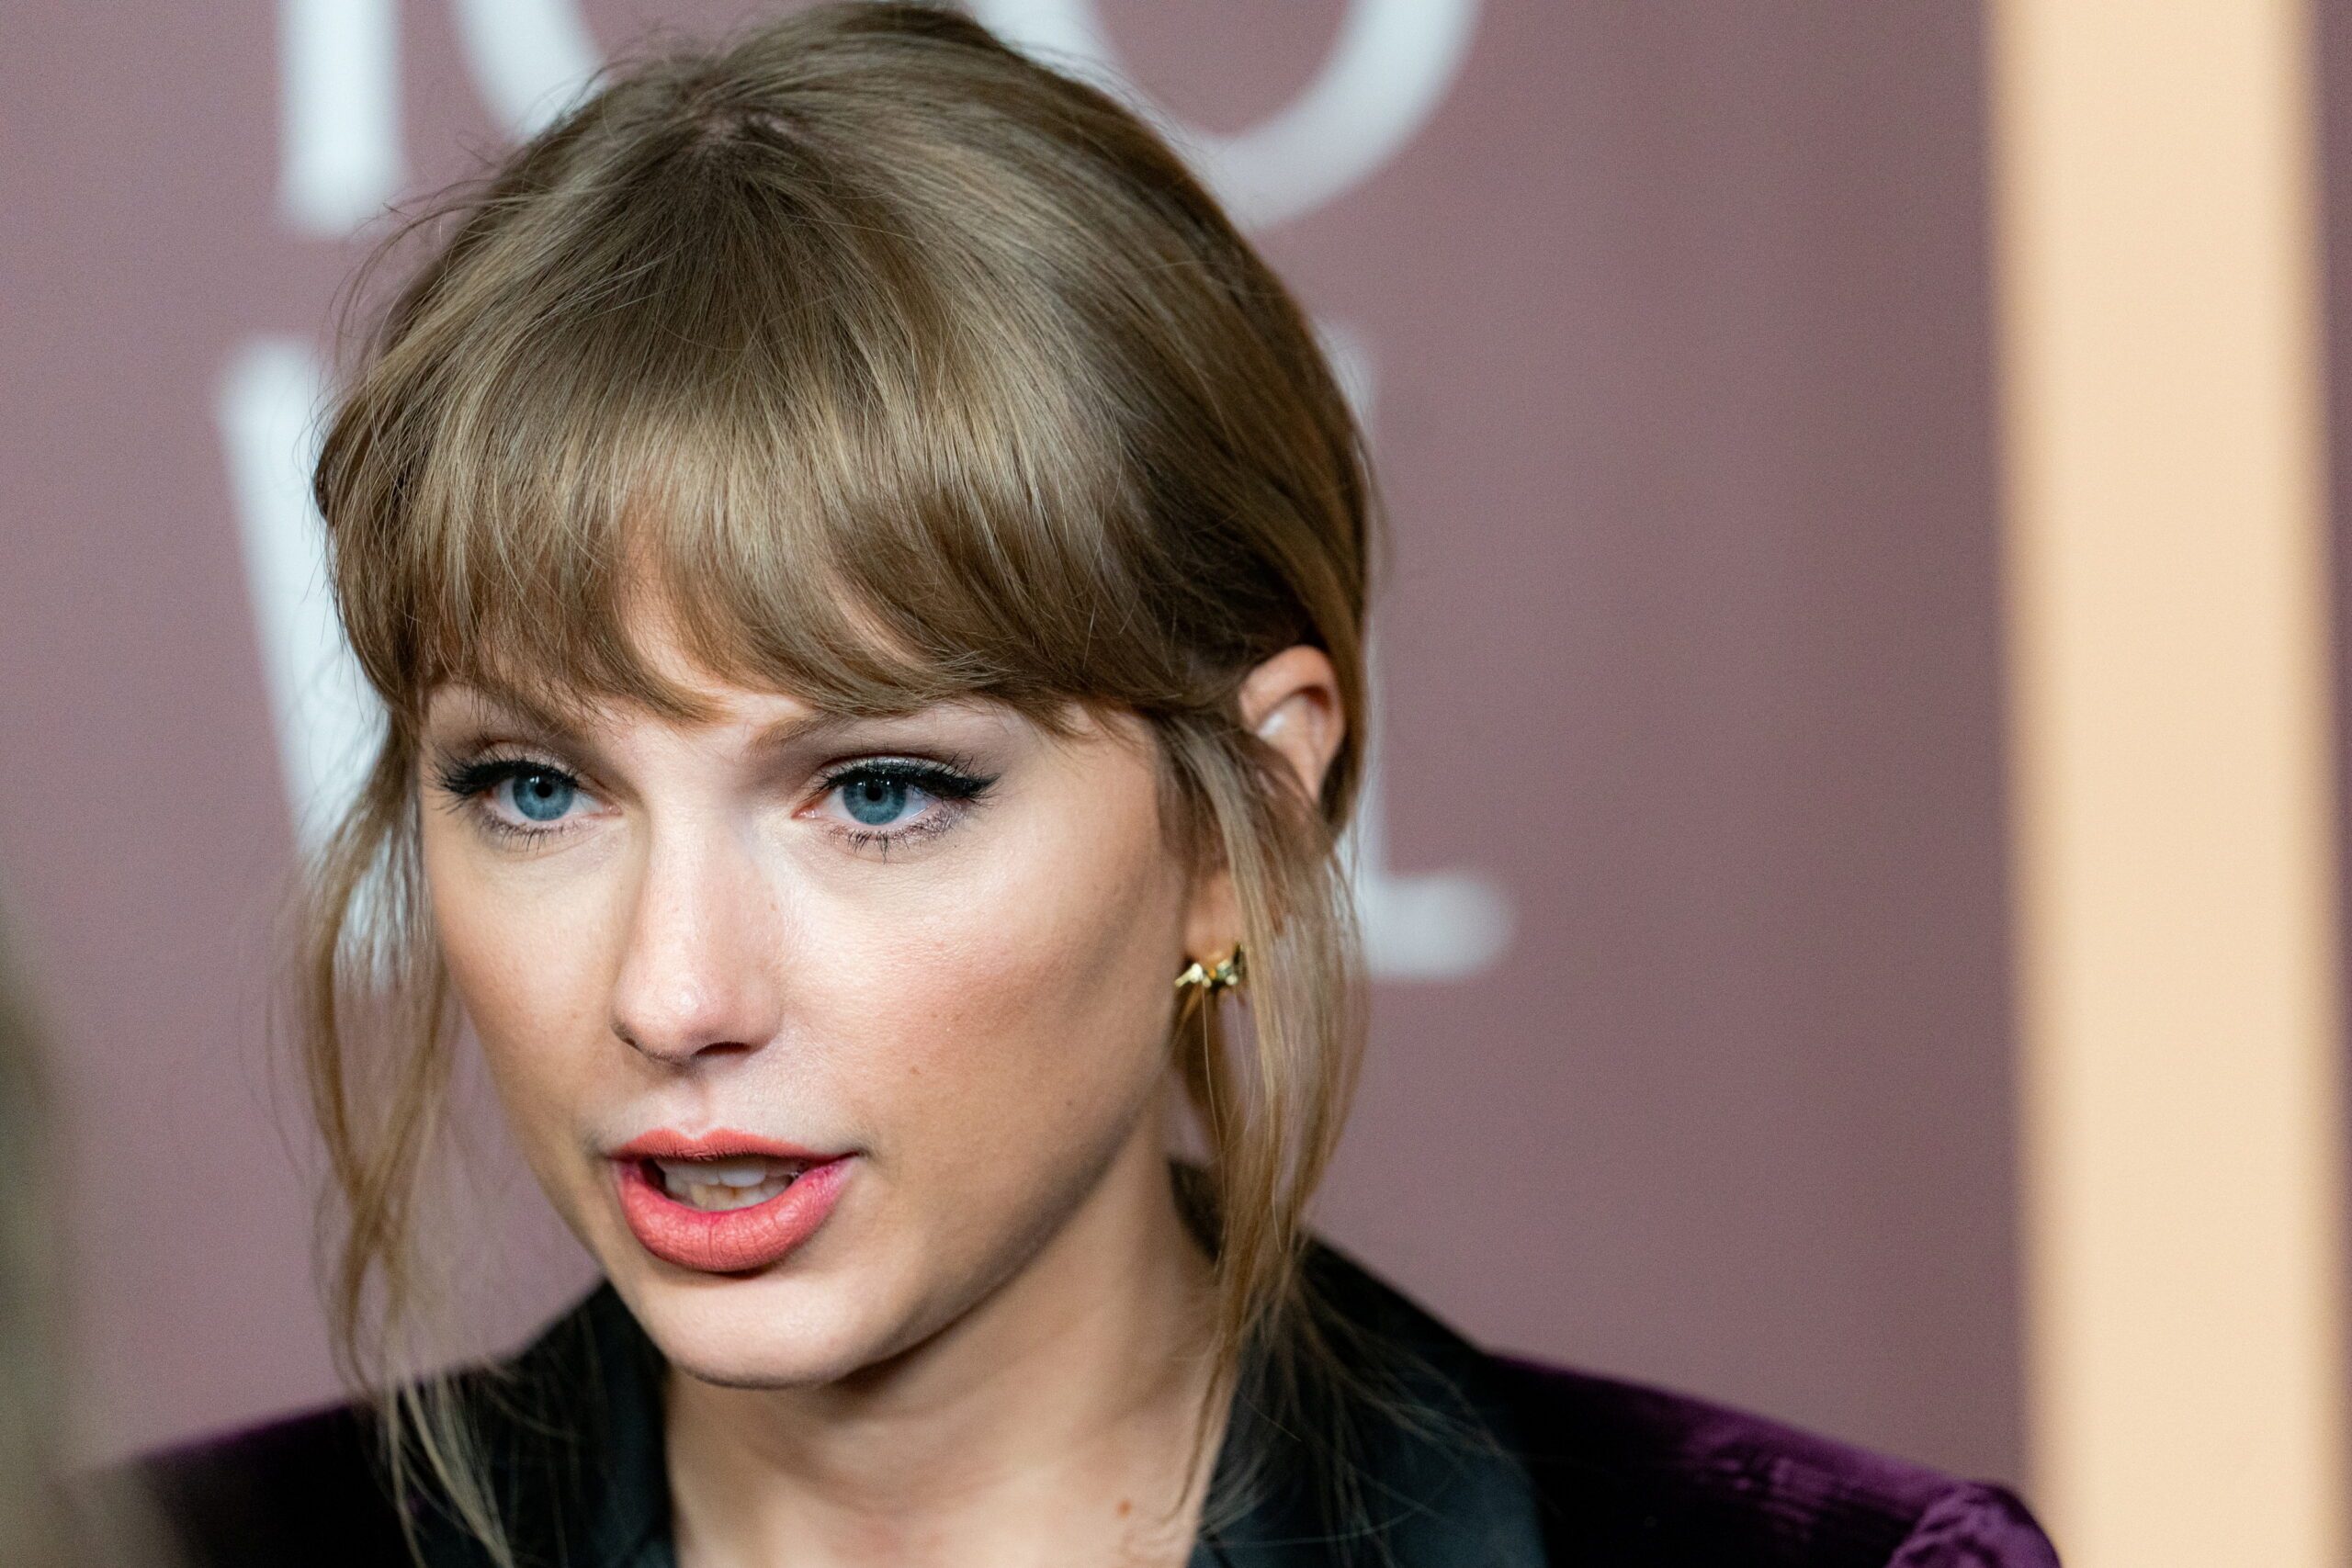 Can’t shake this off: Taylor Swift to face copyright lawsuit